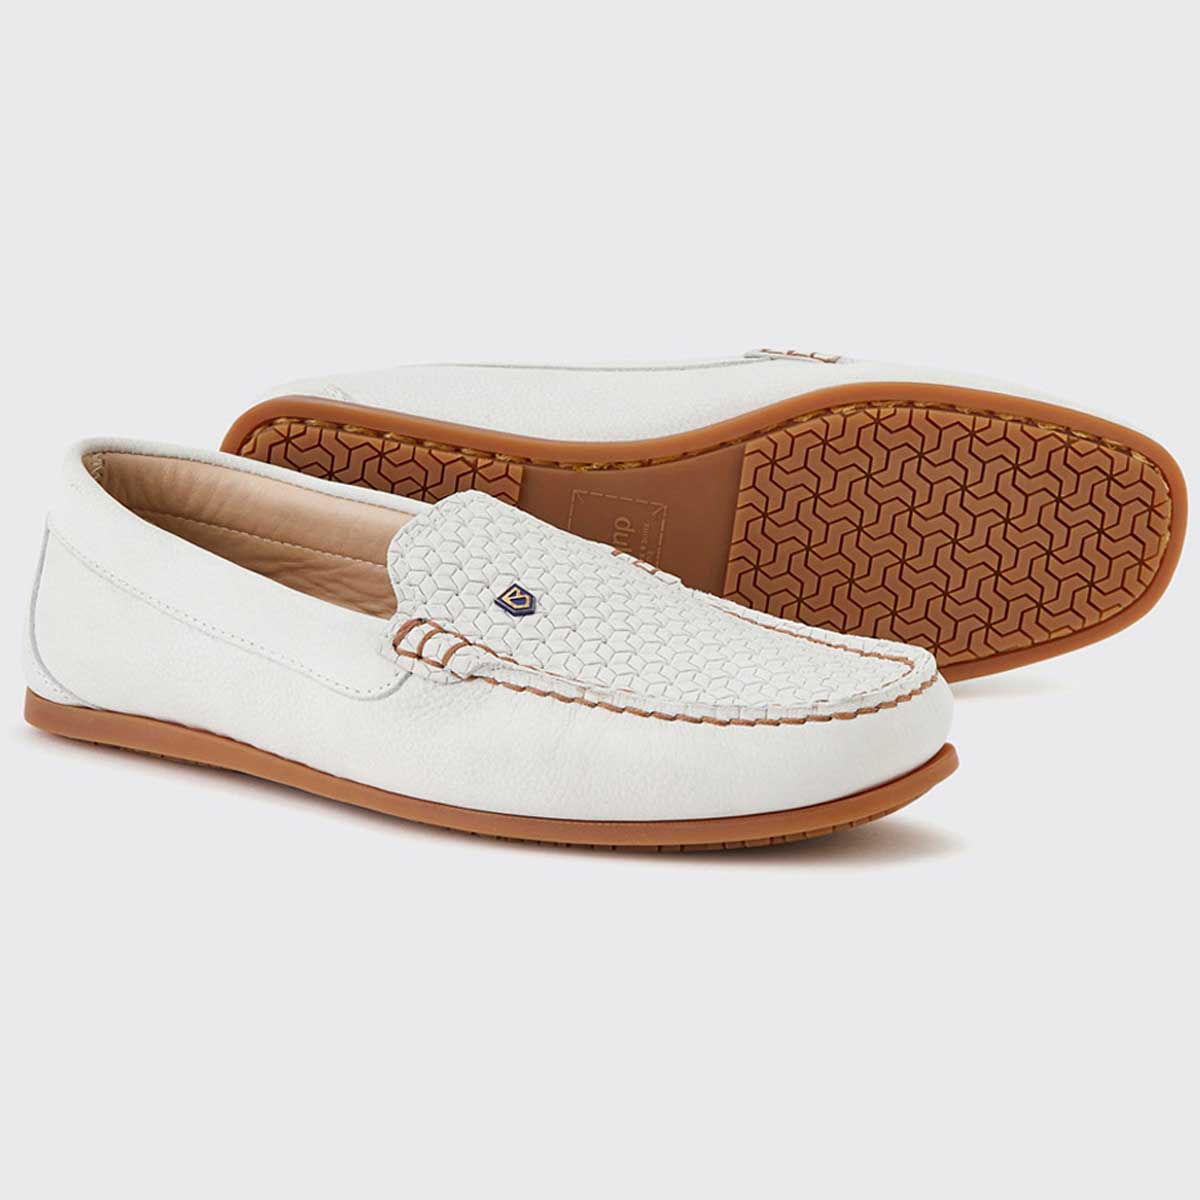 DUBARRY Ladies Cannes Loafer - White